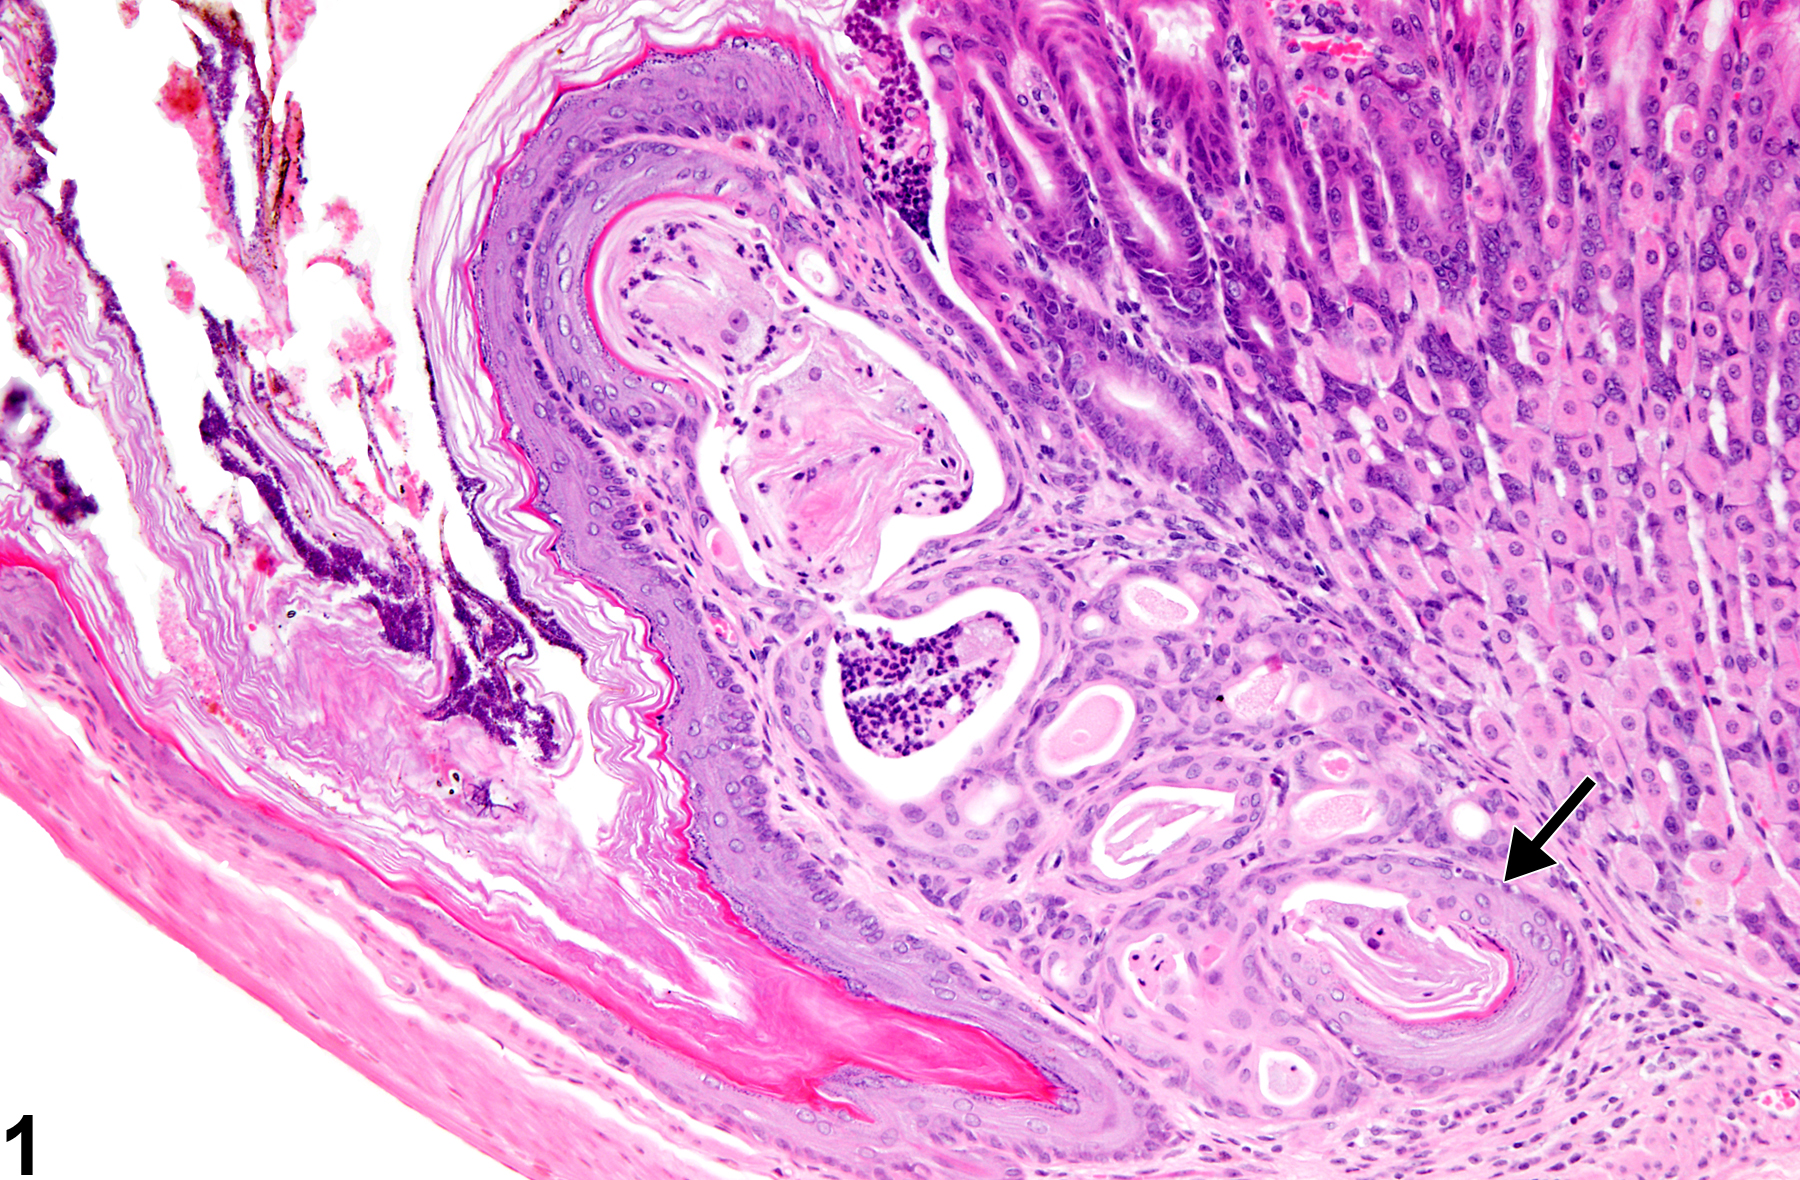 Image of metaplasia, squamous in the glandular stomach from a male B6C3F1 mouse in a chronic study